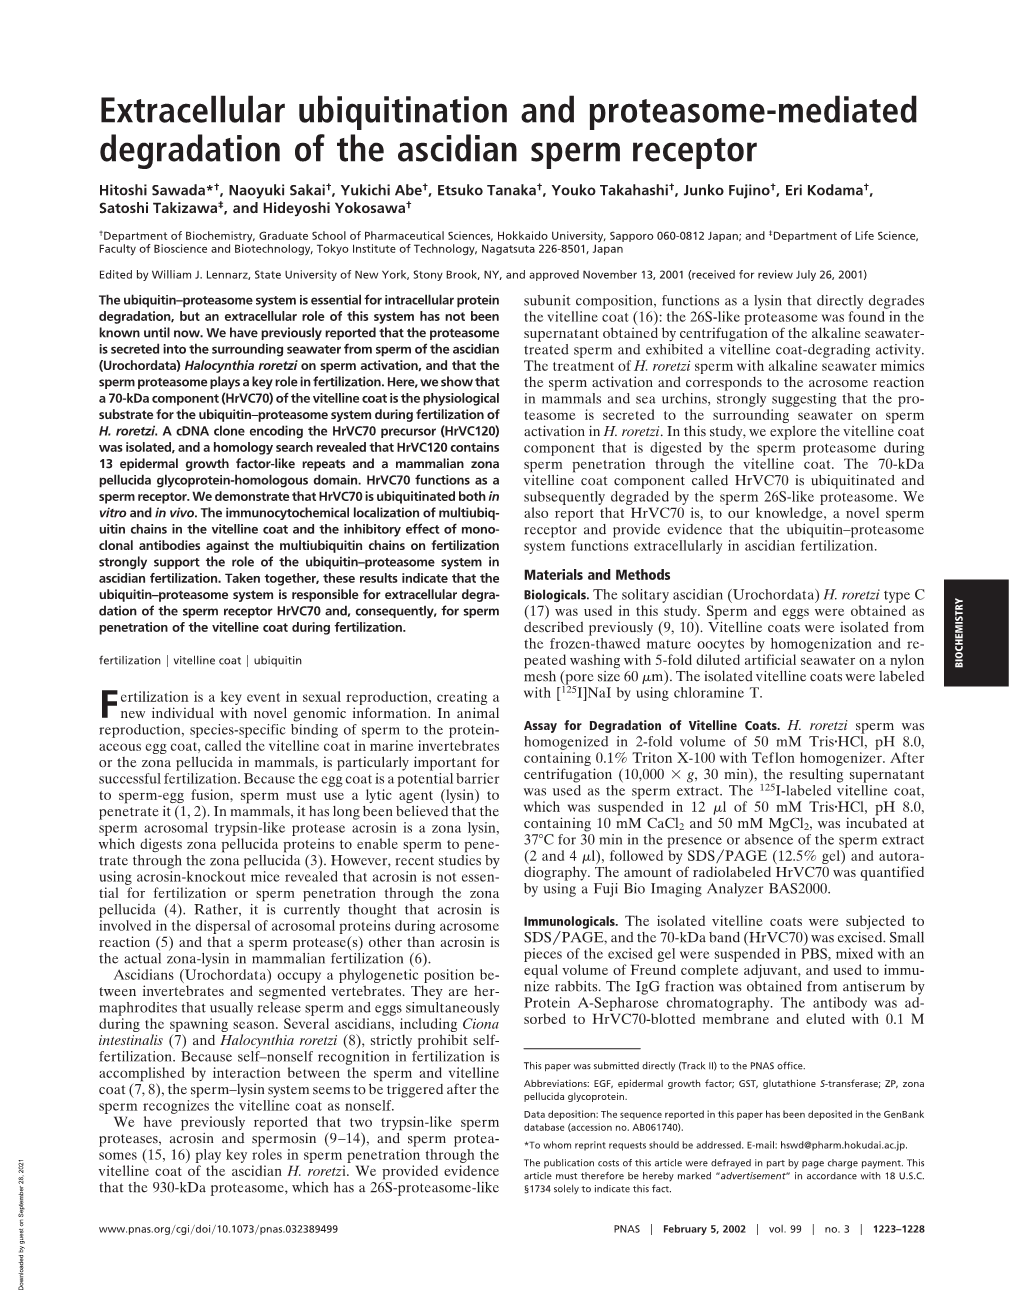 Extracellular Ubiquitination and Proteasome-Mediated Degradation of the Ascidian Sperm Receptor